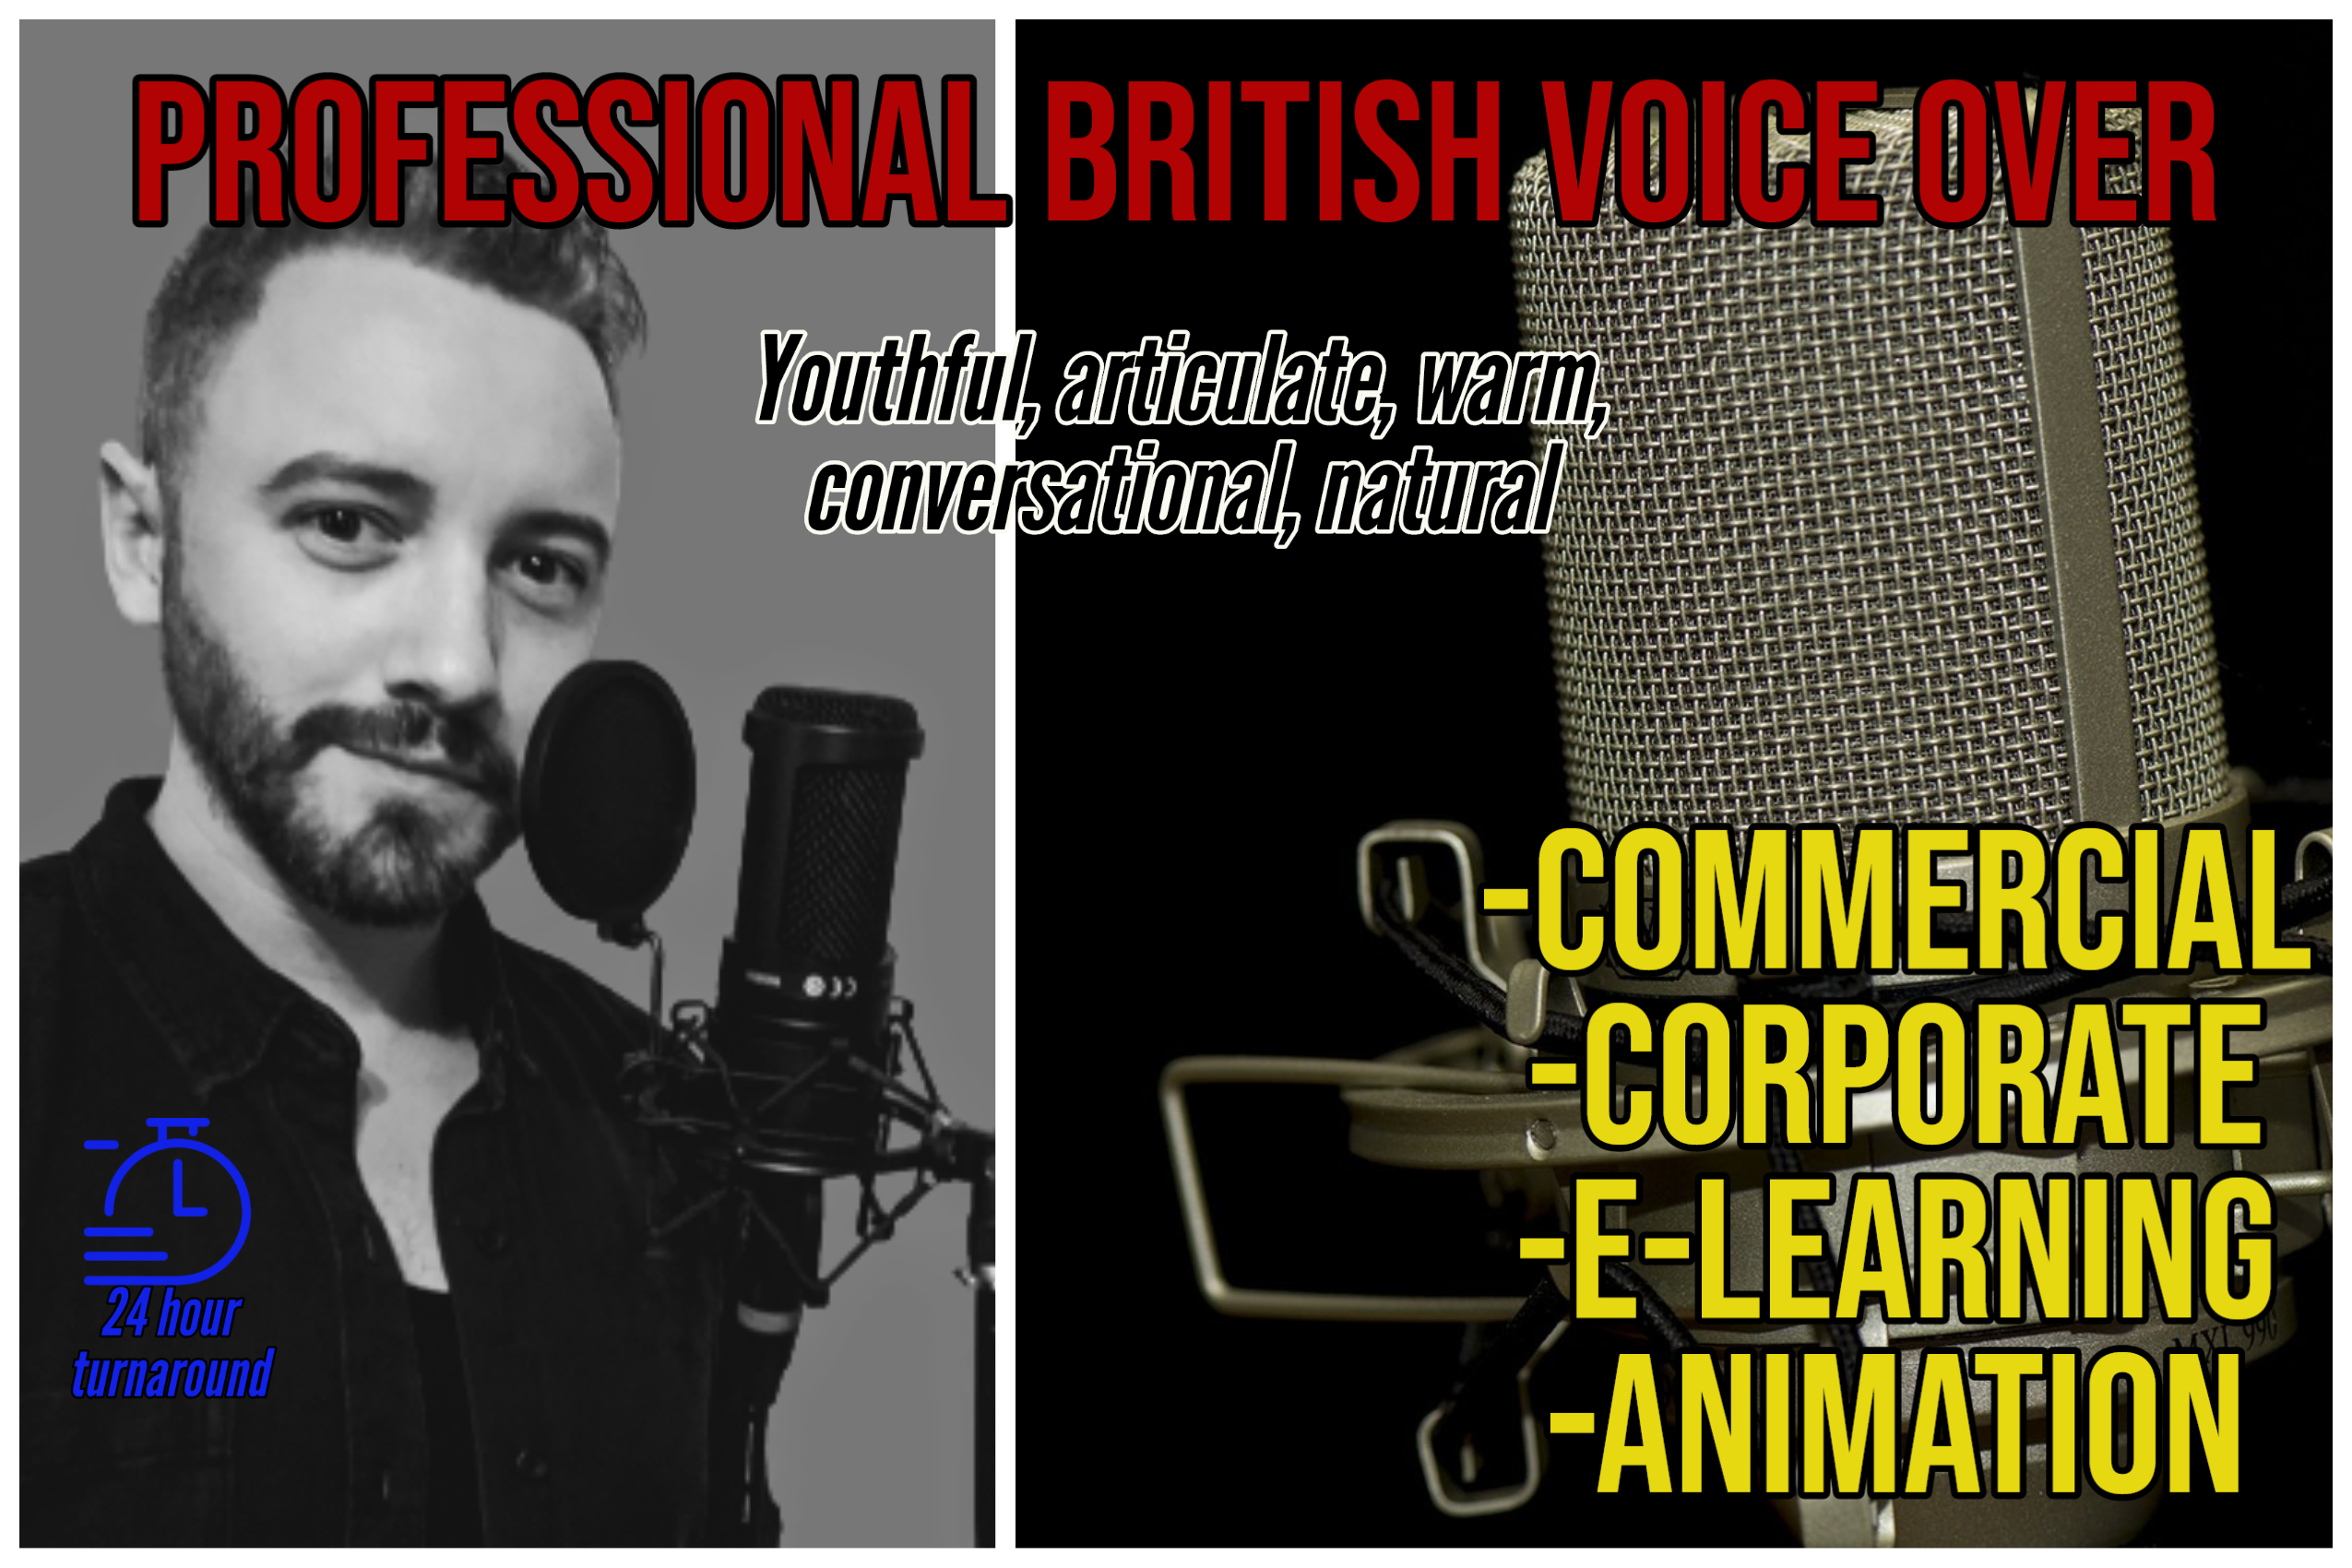 A top-rated, professional and conversational Voice Over for your video